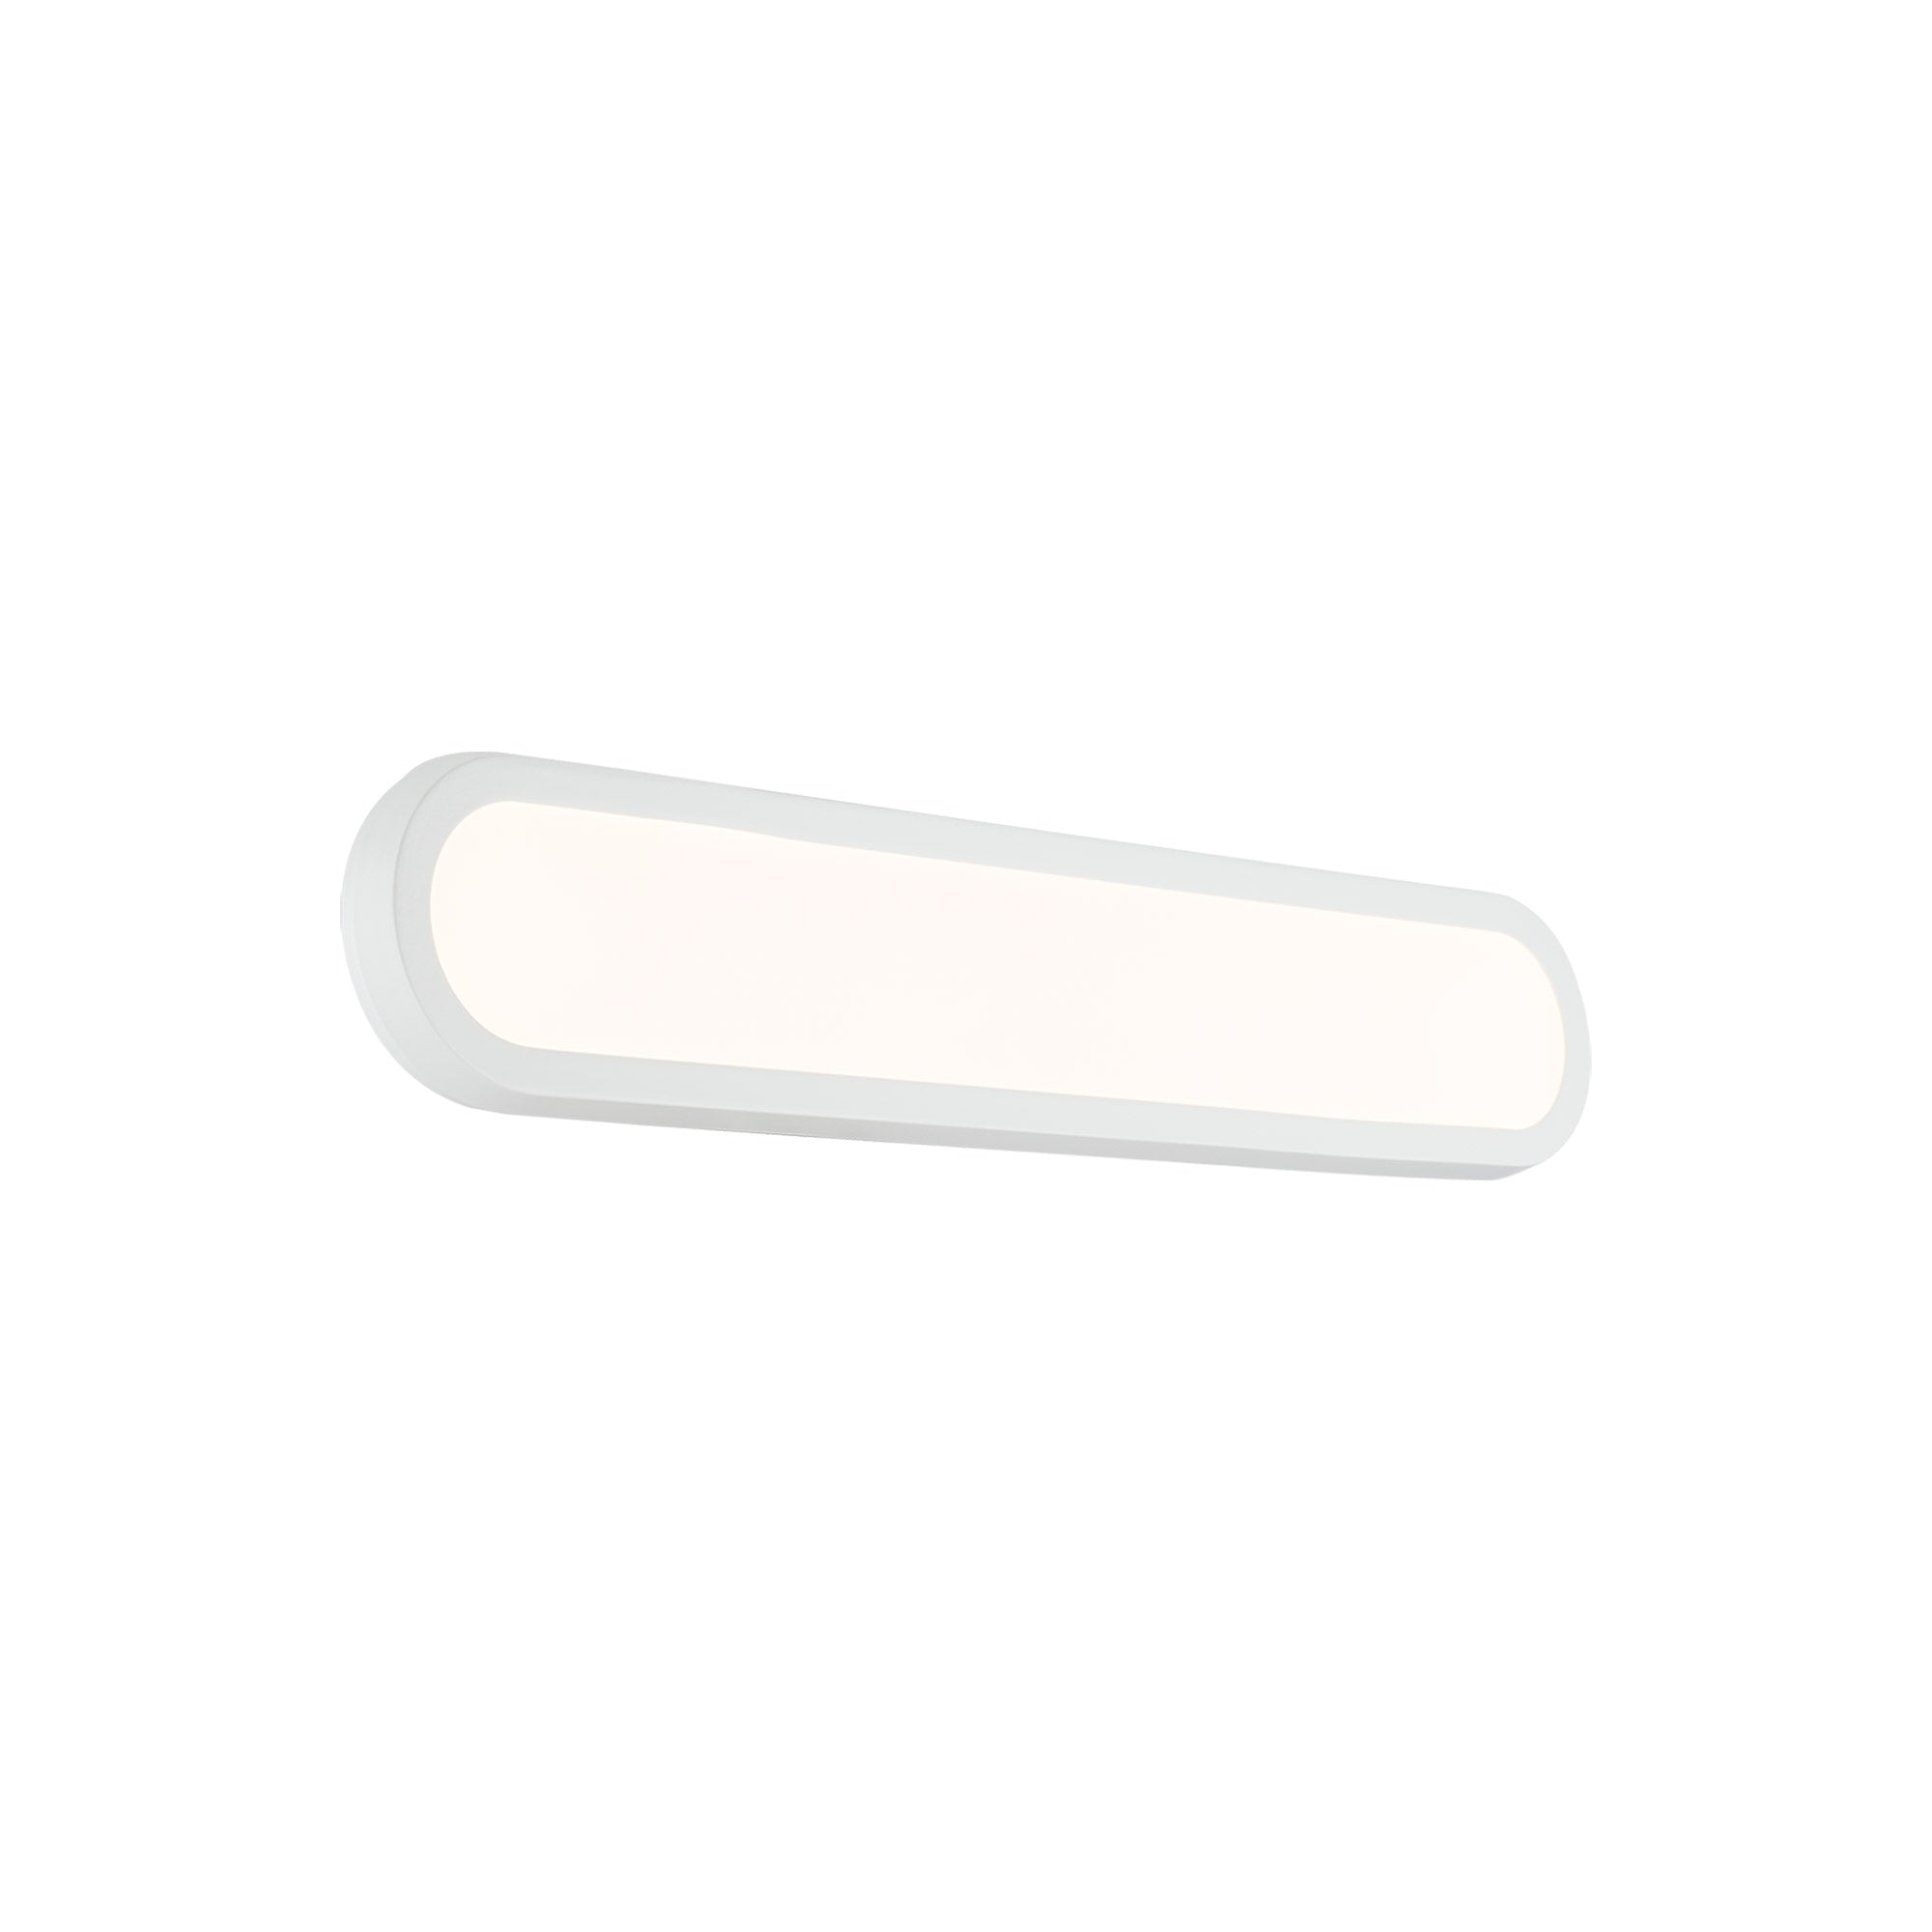 ARGO Bathroom sconce White INTEGRATED LED - WS-93027-WT | MODERN FORMS